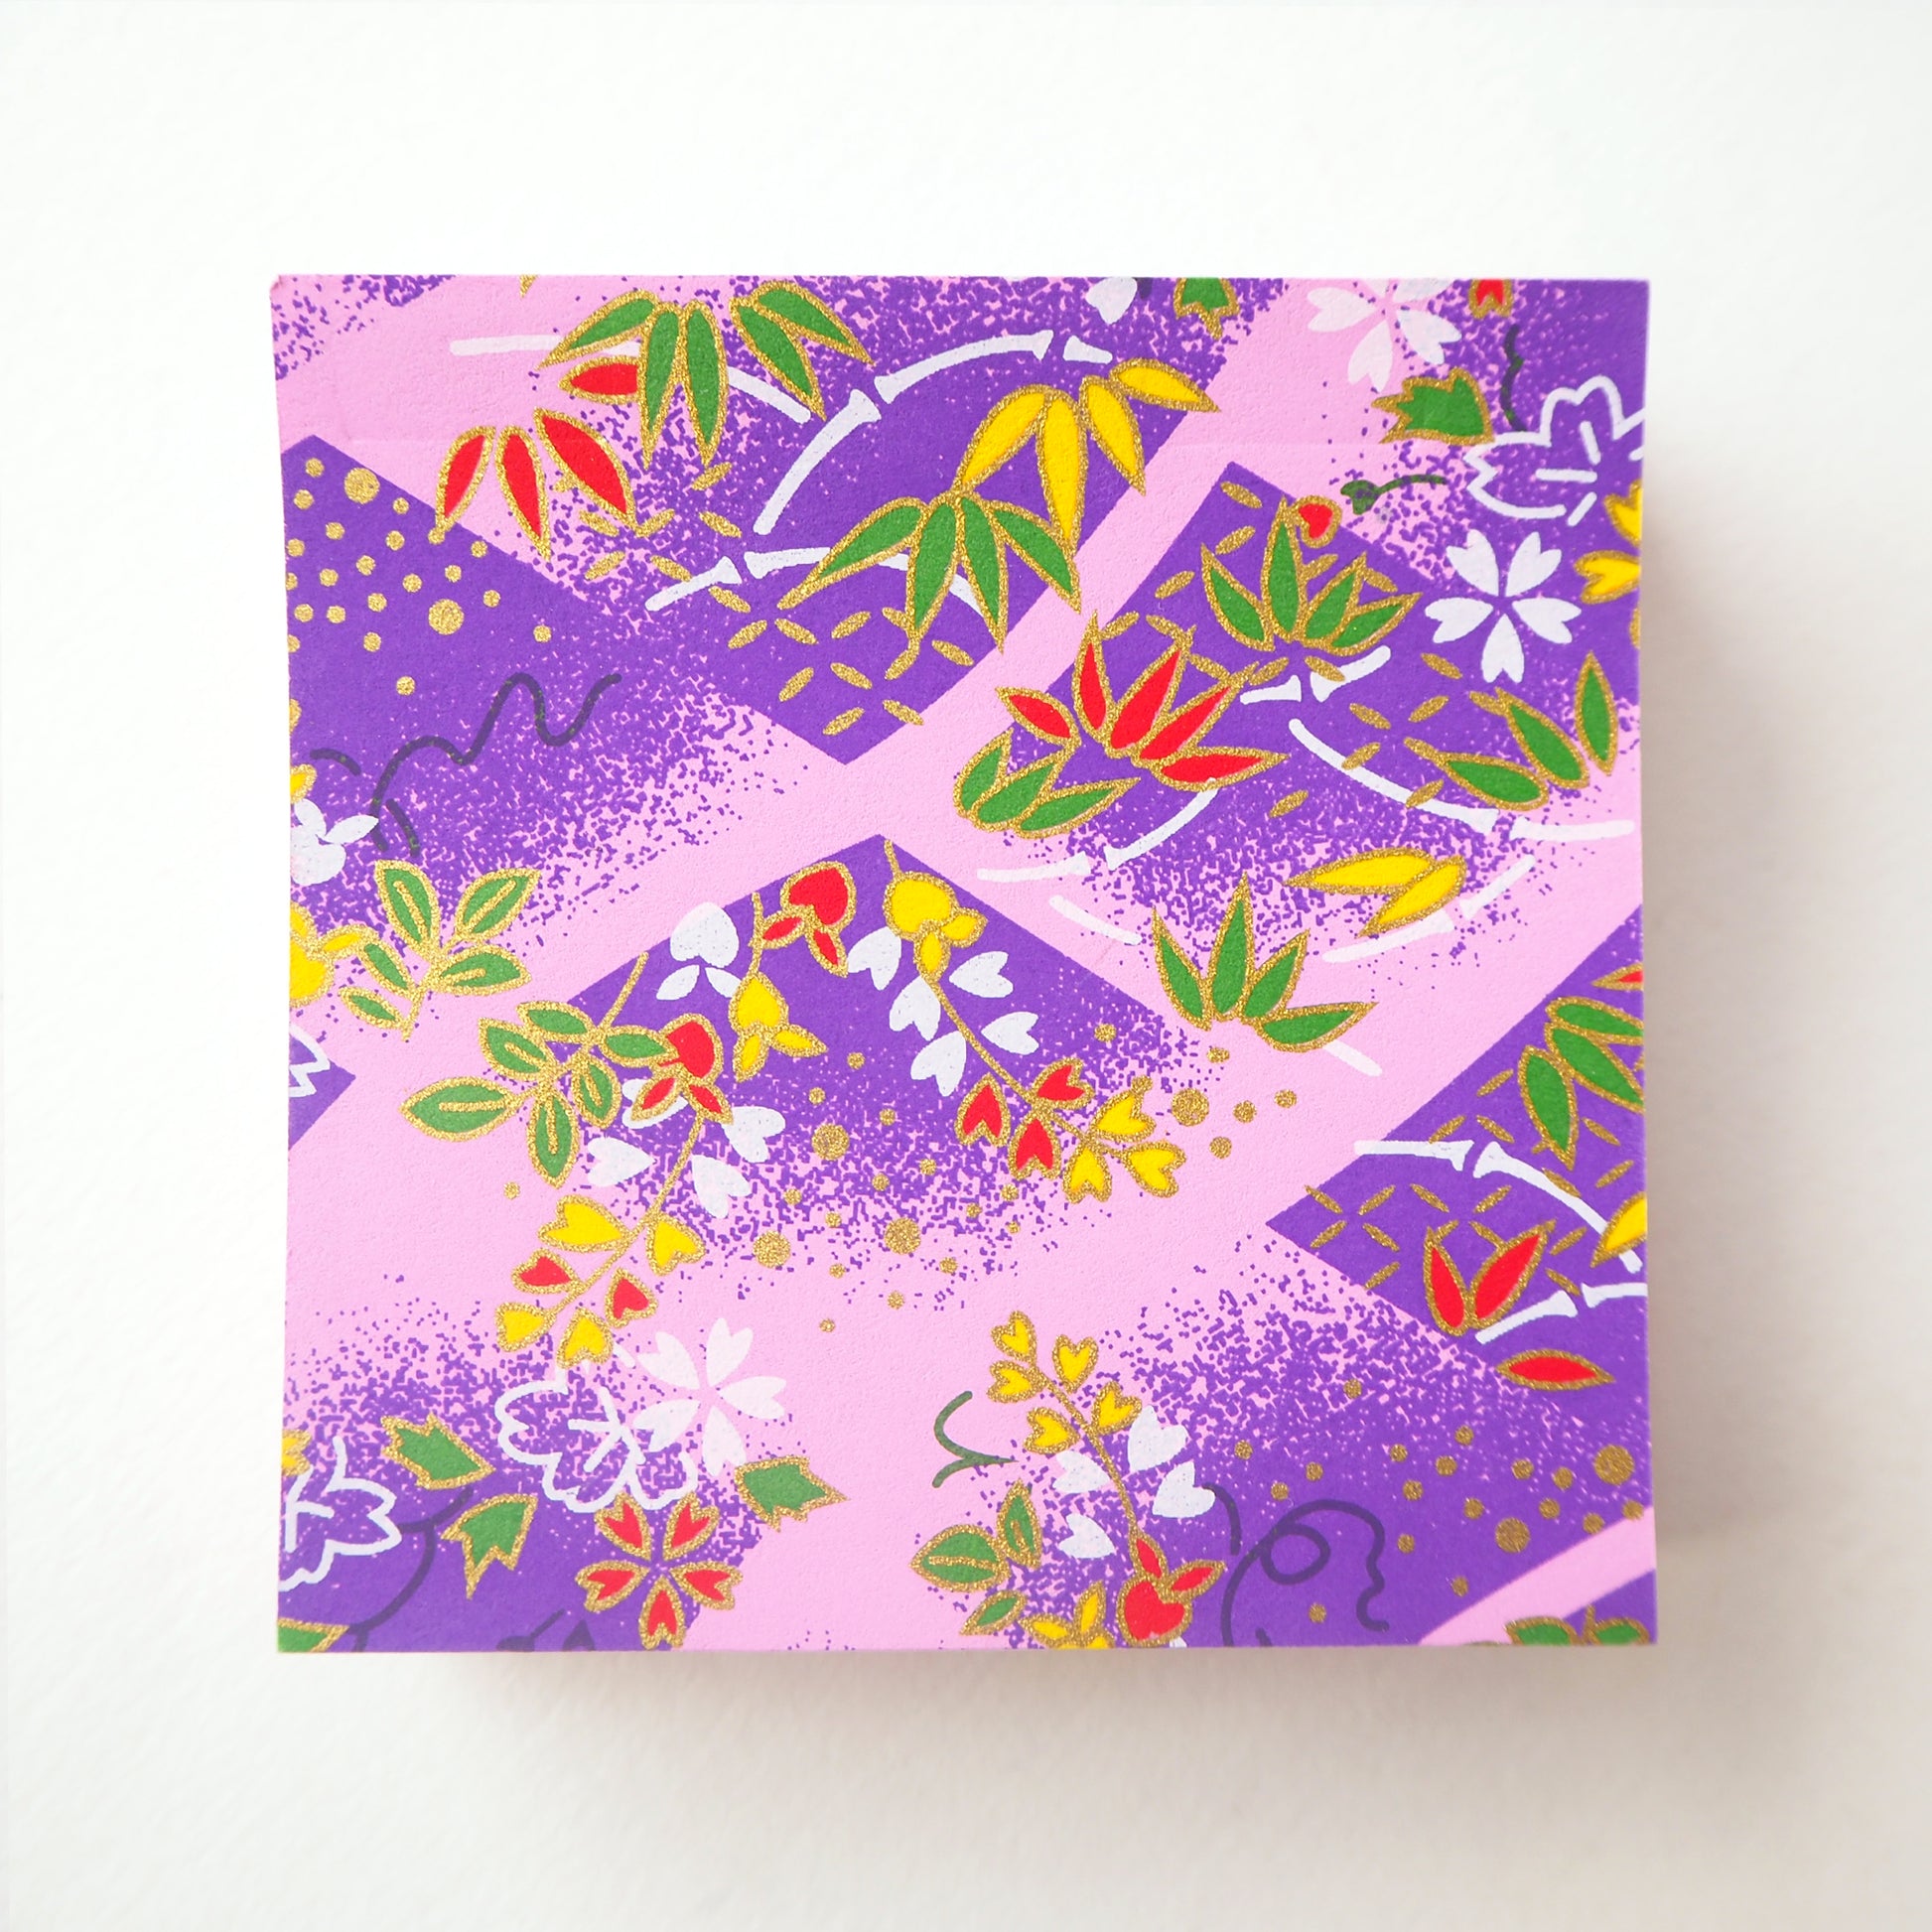 Pack of 100 Sheets 7x7cm Yuzen Washi Origami Paper HZ-443 - Cherry Blossom & Weight Chain Purple - washi paper - Lavender Home London